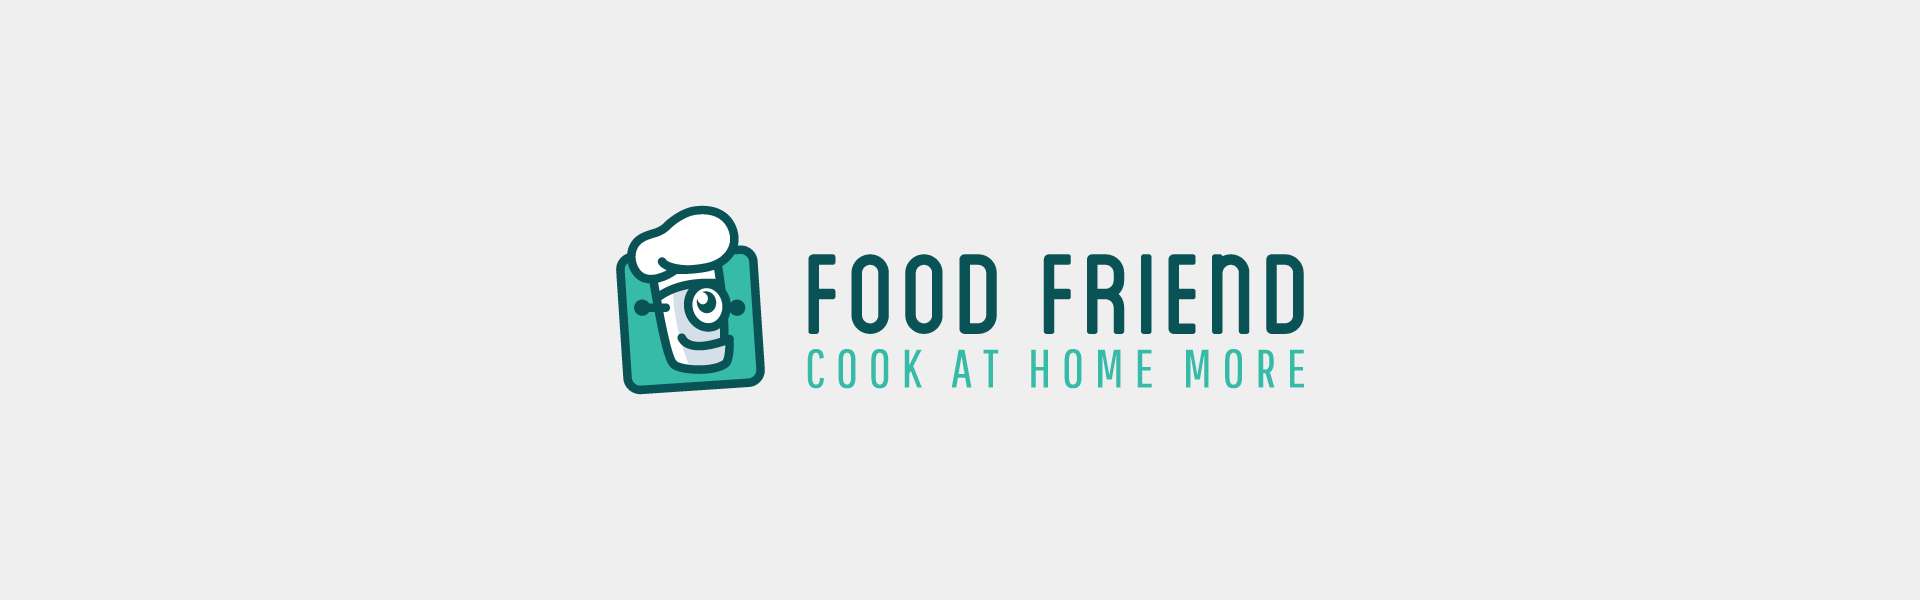 Logo design for "Food Friend" featuring a stylized image of a friendly chef within a green badge, accompanied by the tagline "cook at home more".